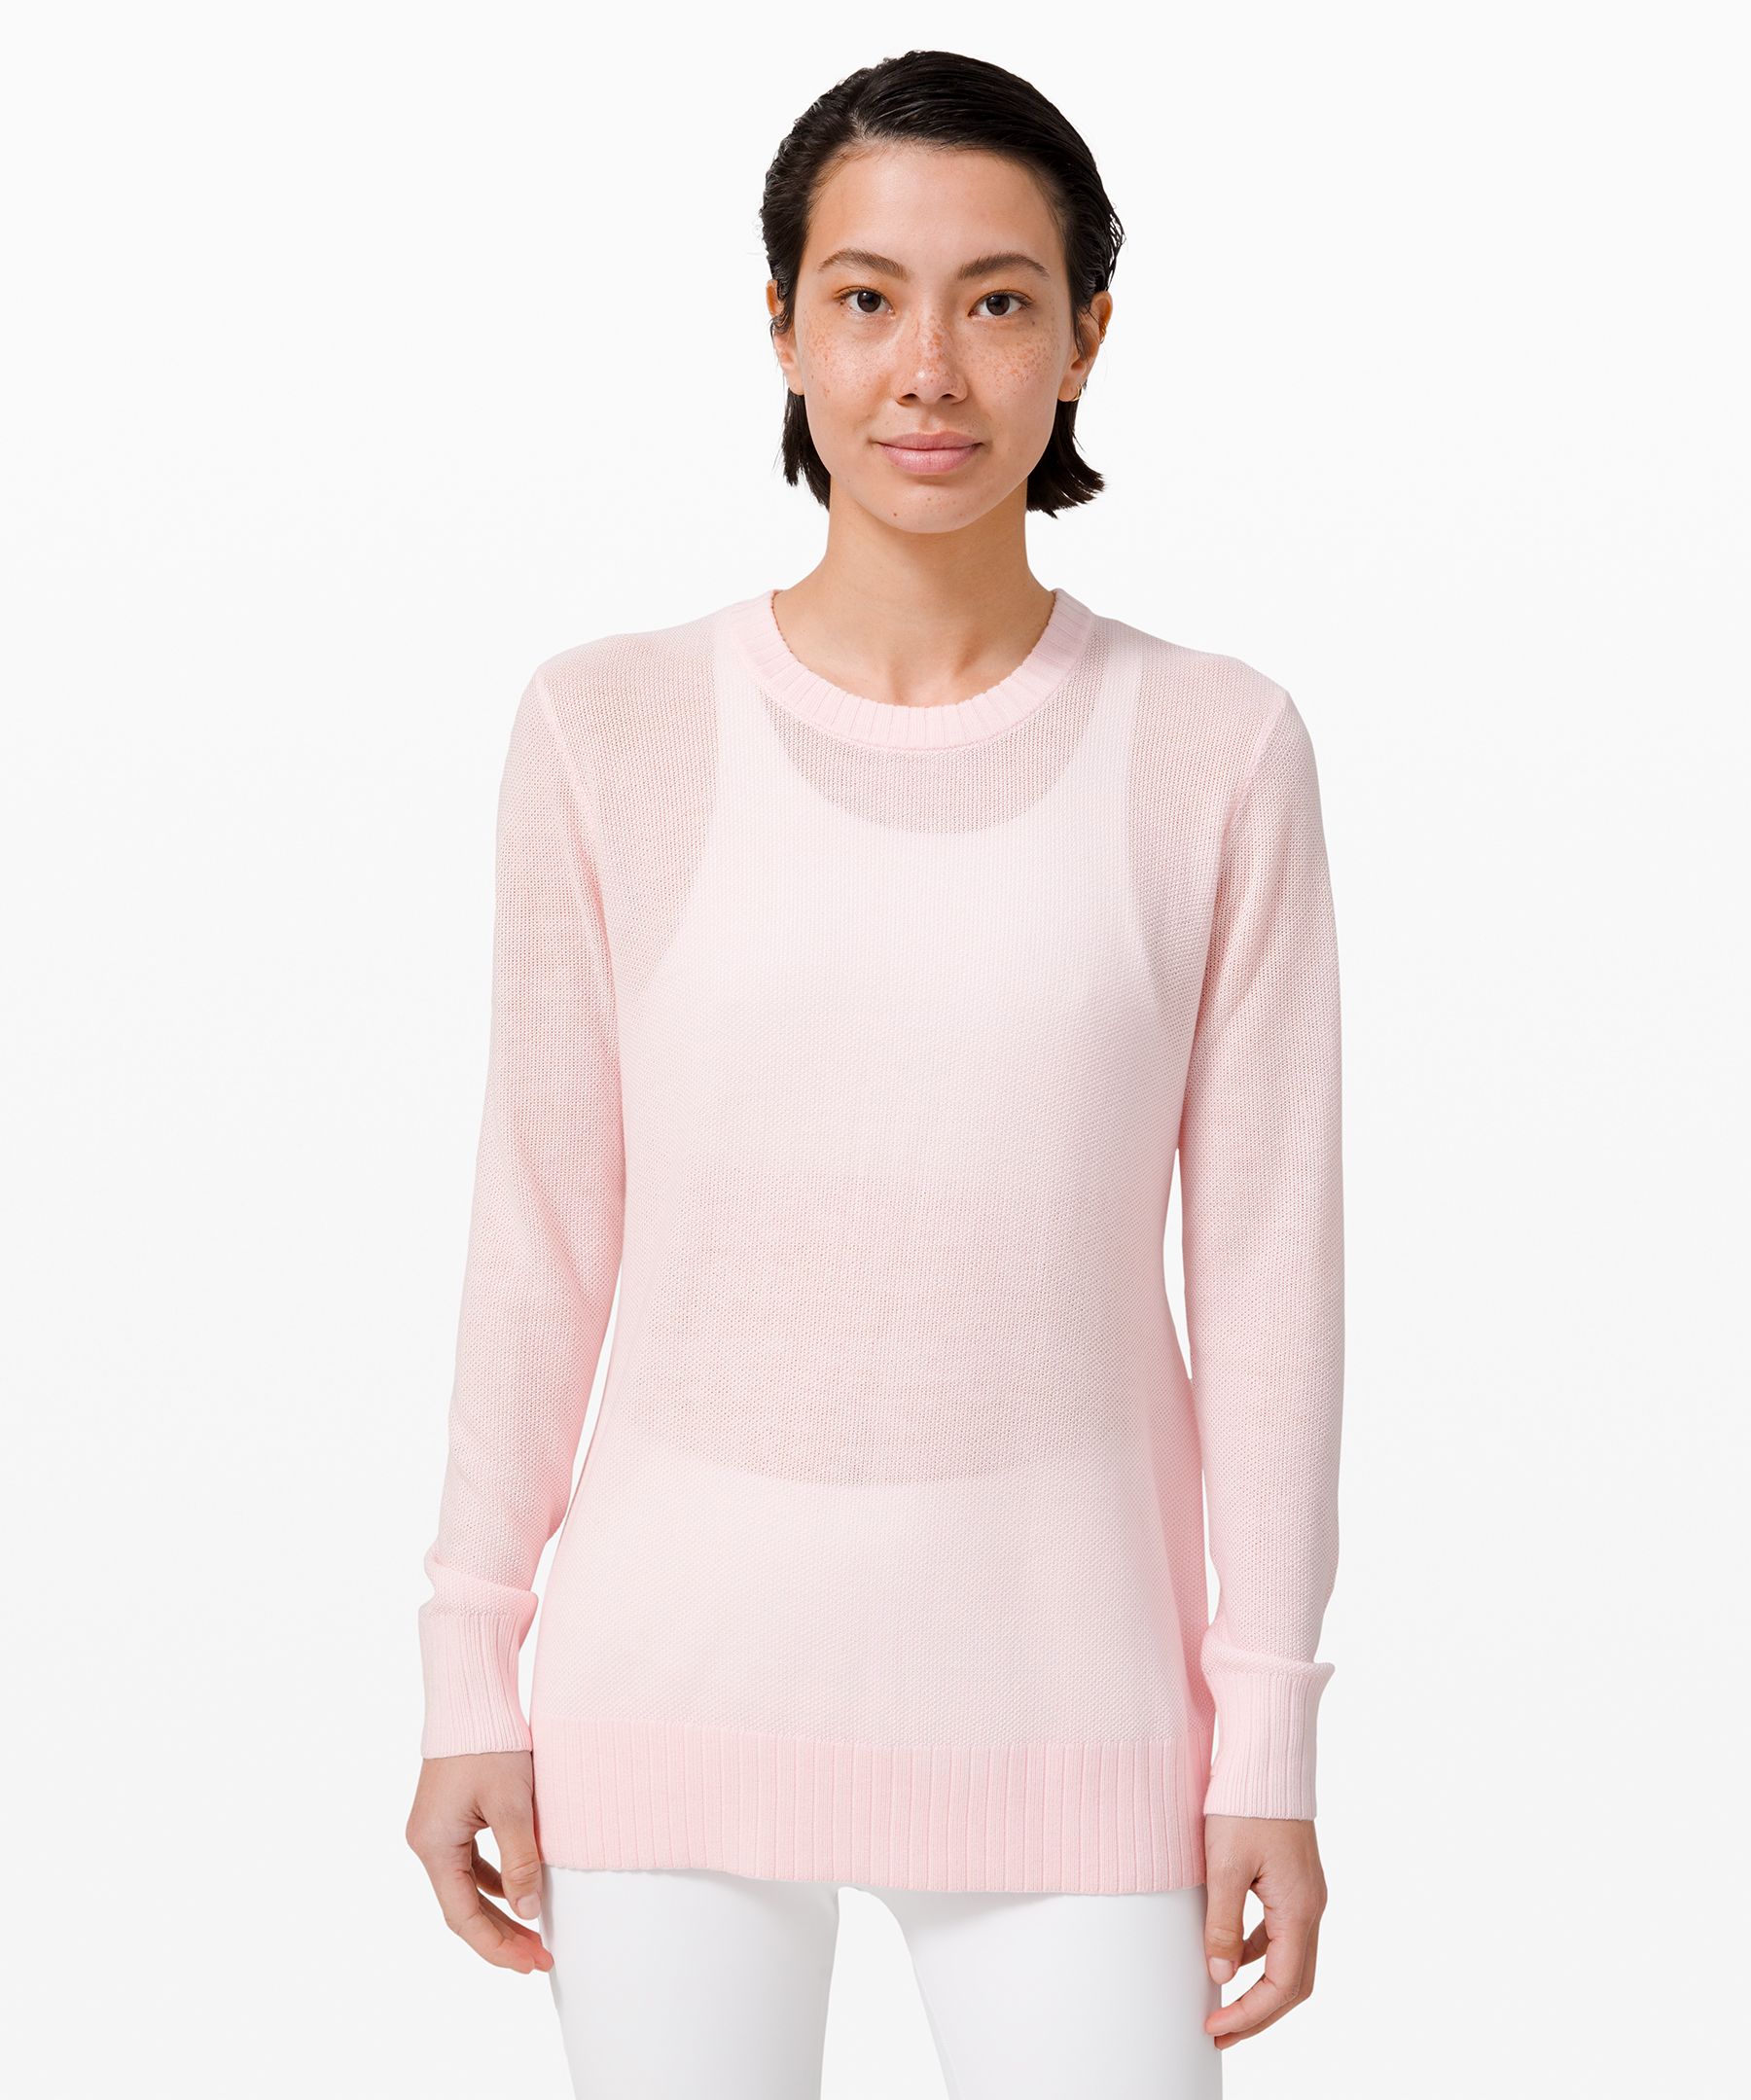 Lululemon Sincerely Yours Sweater In Pink